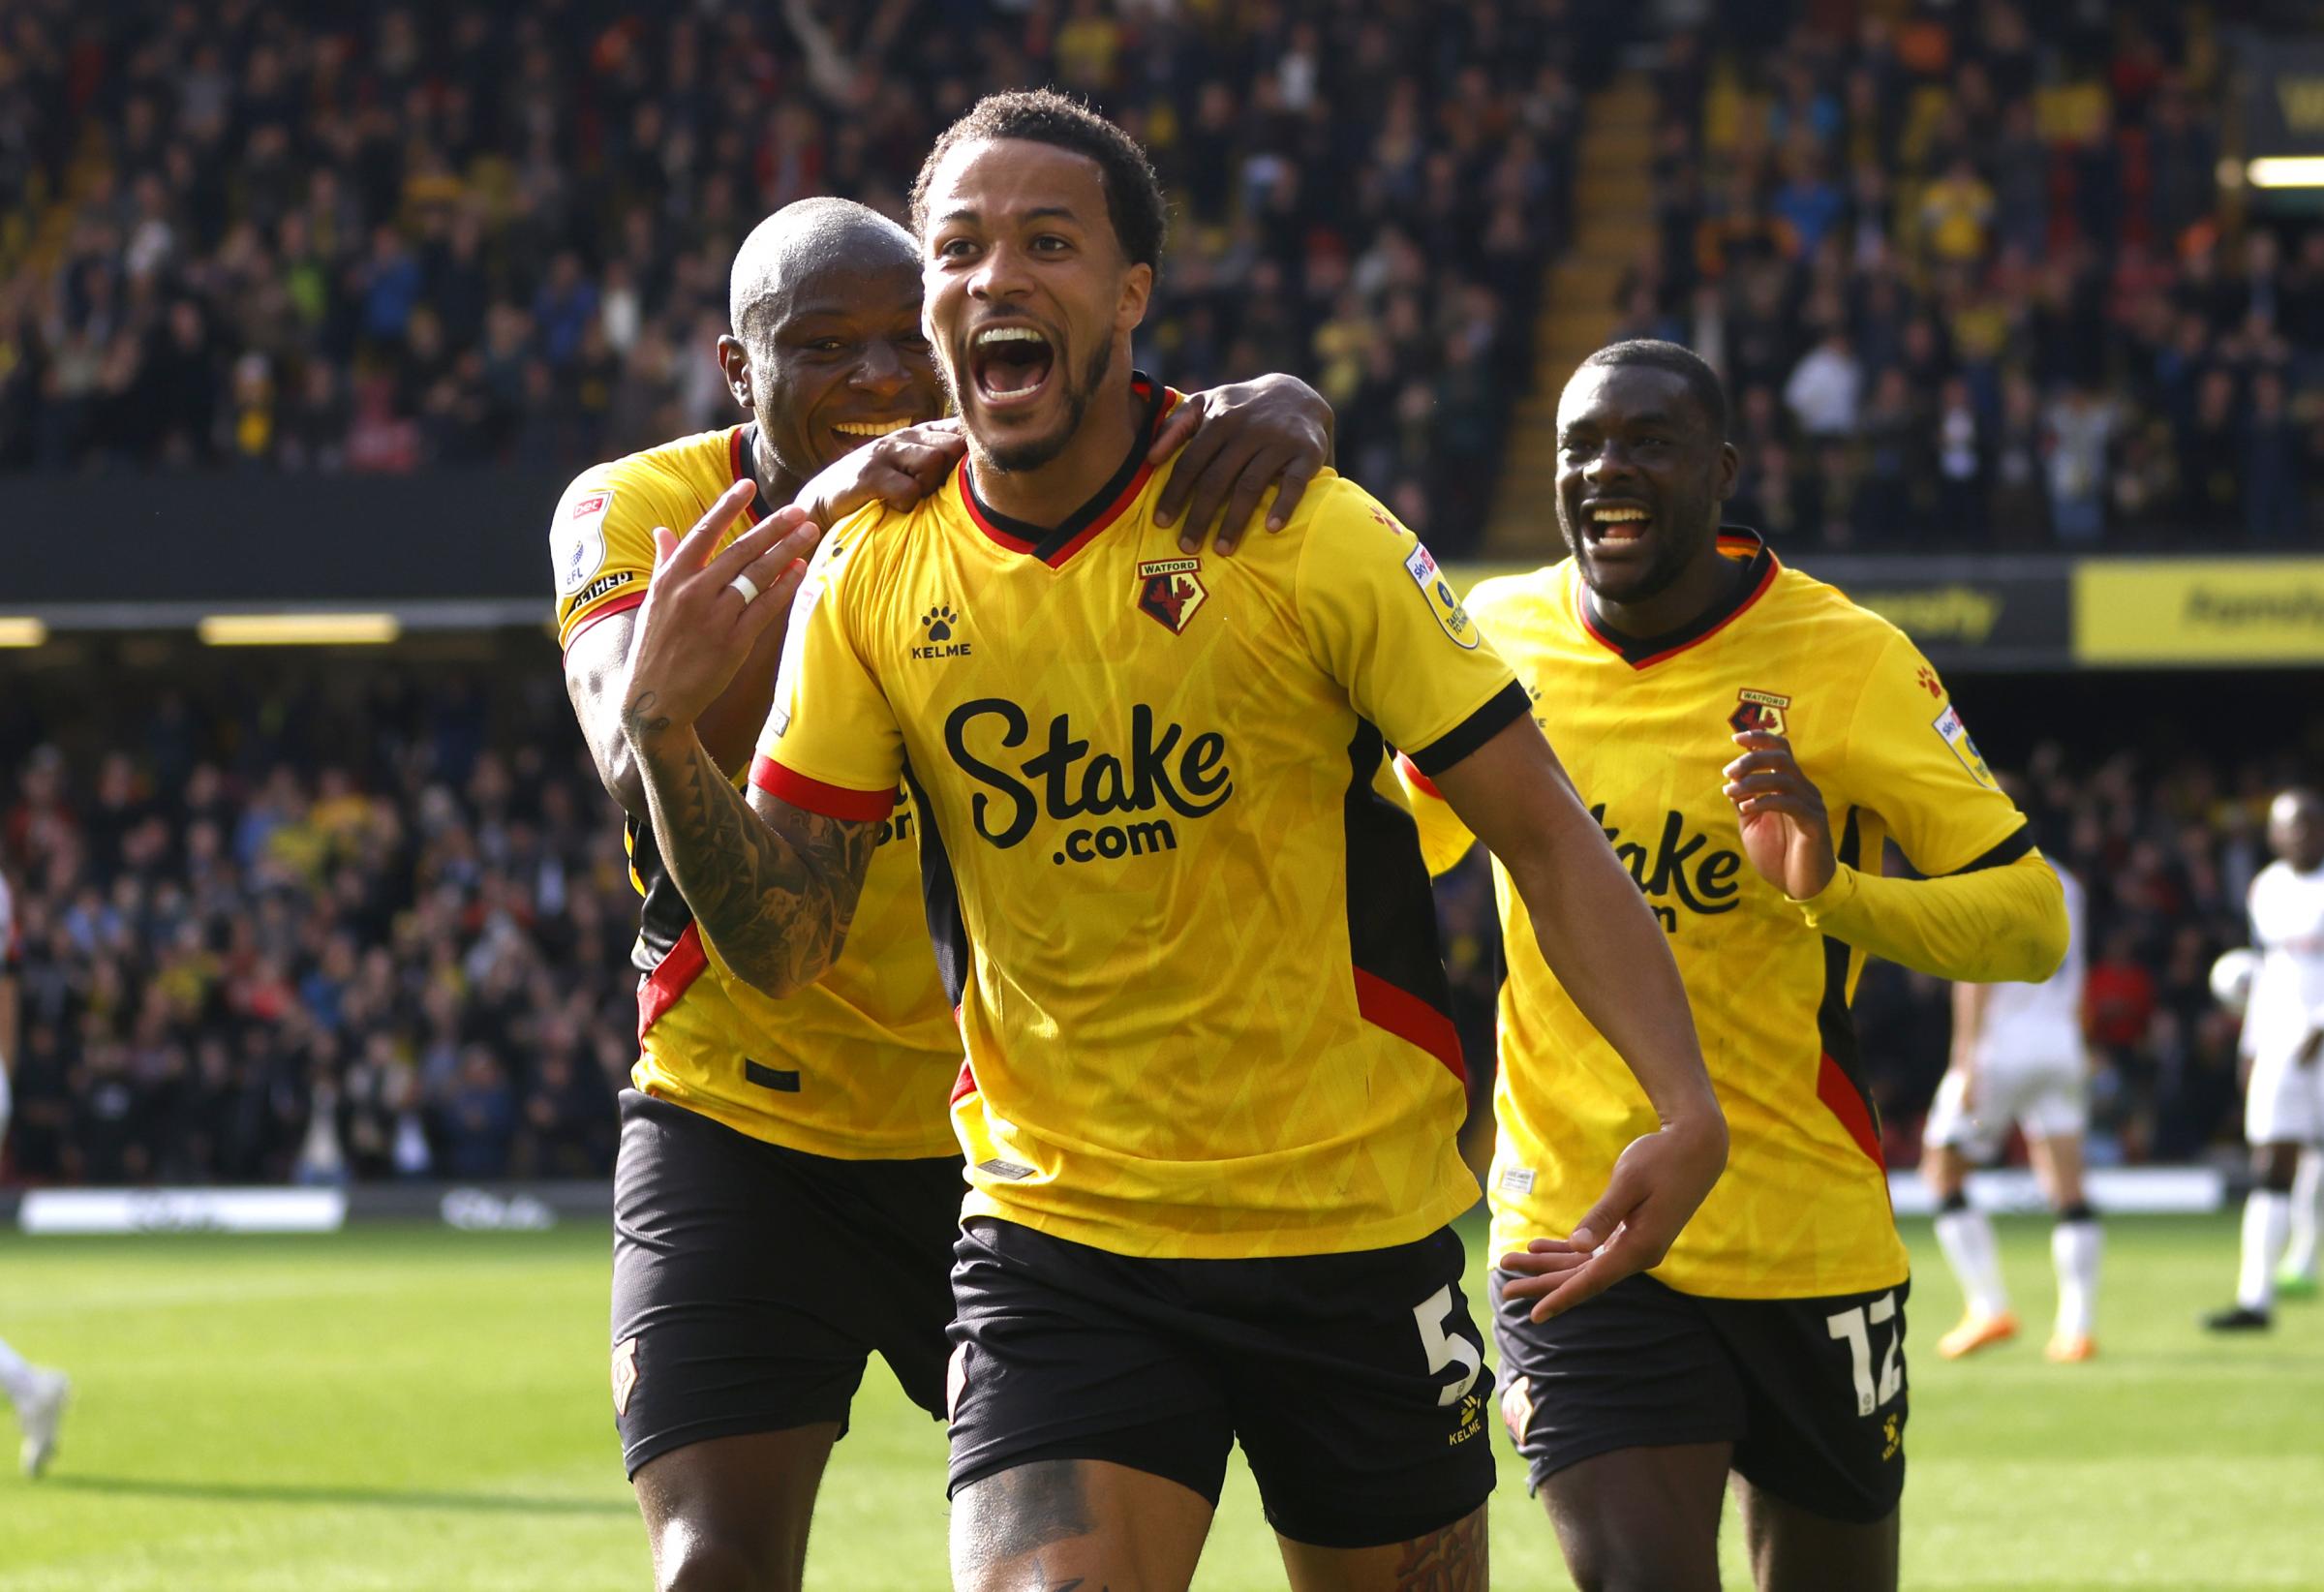 Defender Troost-Ekong confirms he's left Watford for Italy